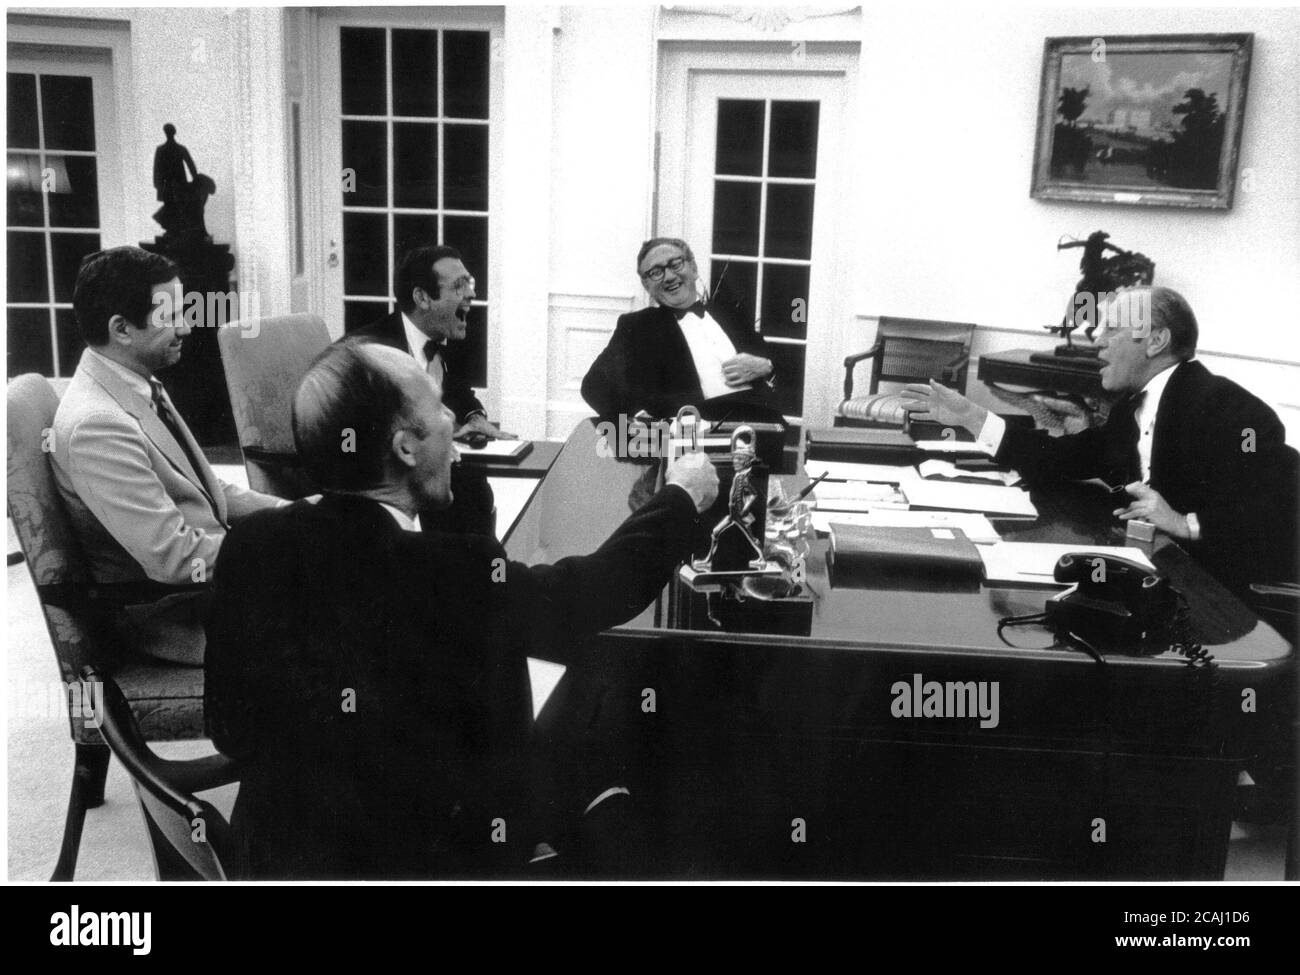 In this file photo, United States President Gerald R. Ford (right) enjoys a light moment with his senior staff in the Oval Office at the White House on May 14, 1975.  (Left to Right) National Security Advisor Robert (Bud) McFarlane; National Security Advisor Brent Scowcroft; White House Chief of Staff Donald Rumsfeld; and United States Secretary of State Henry Kissinger.Mandatory Credit: David Hume Kennerly / White House via CNP / MediaPunch Stock Photo